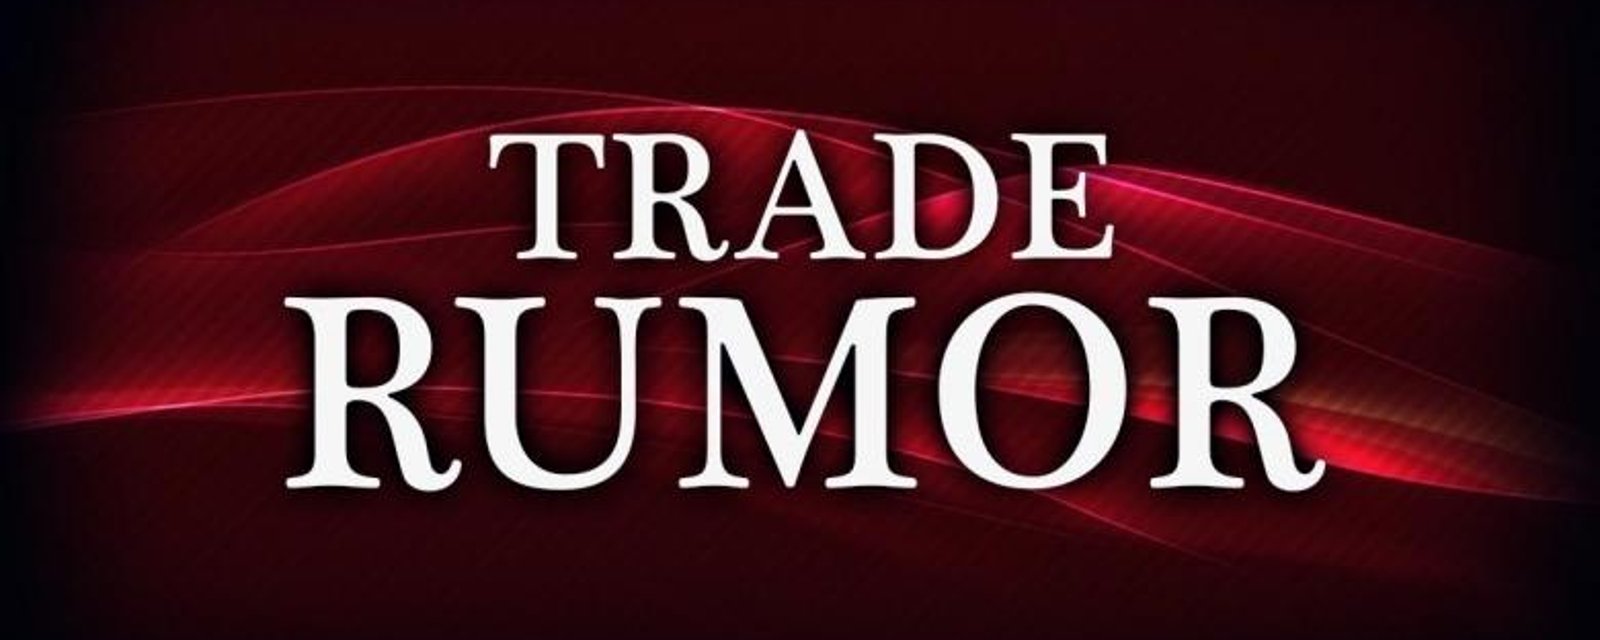 As many as four players on the move in big trade rumor.